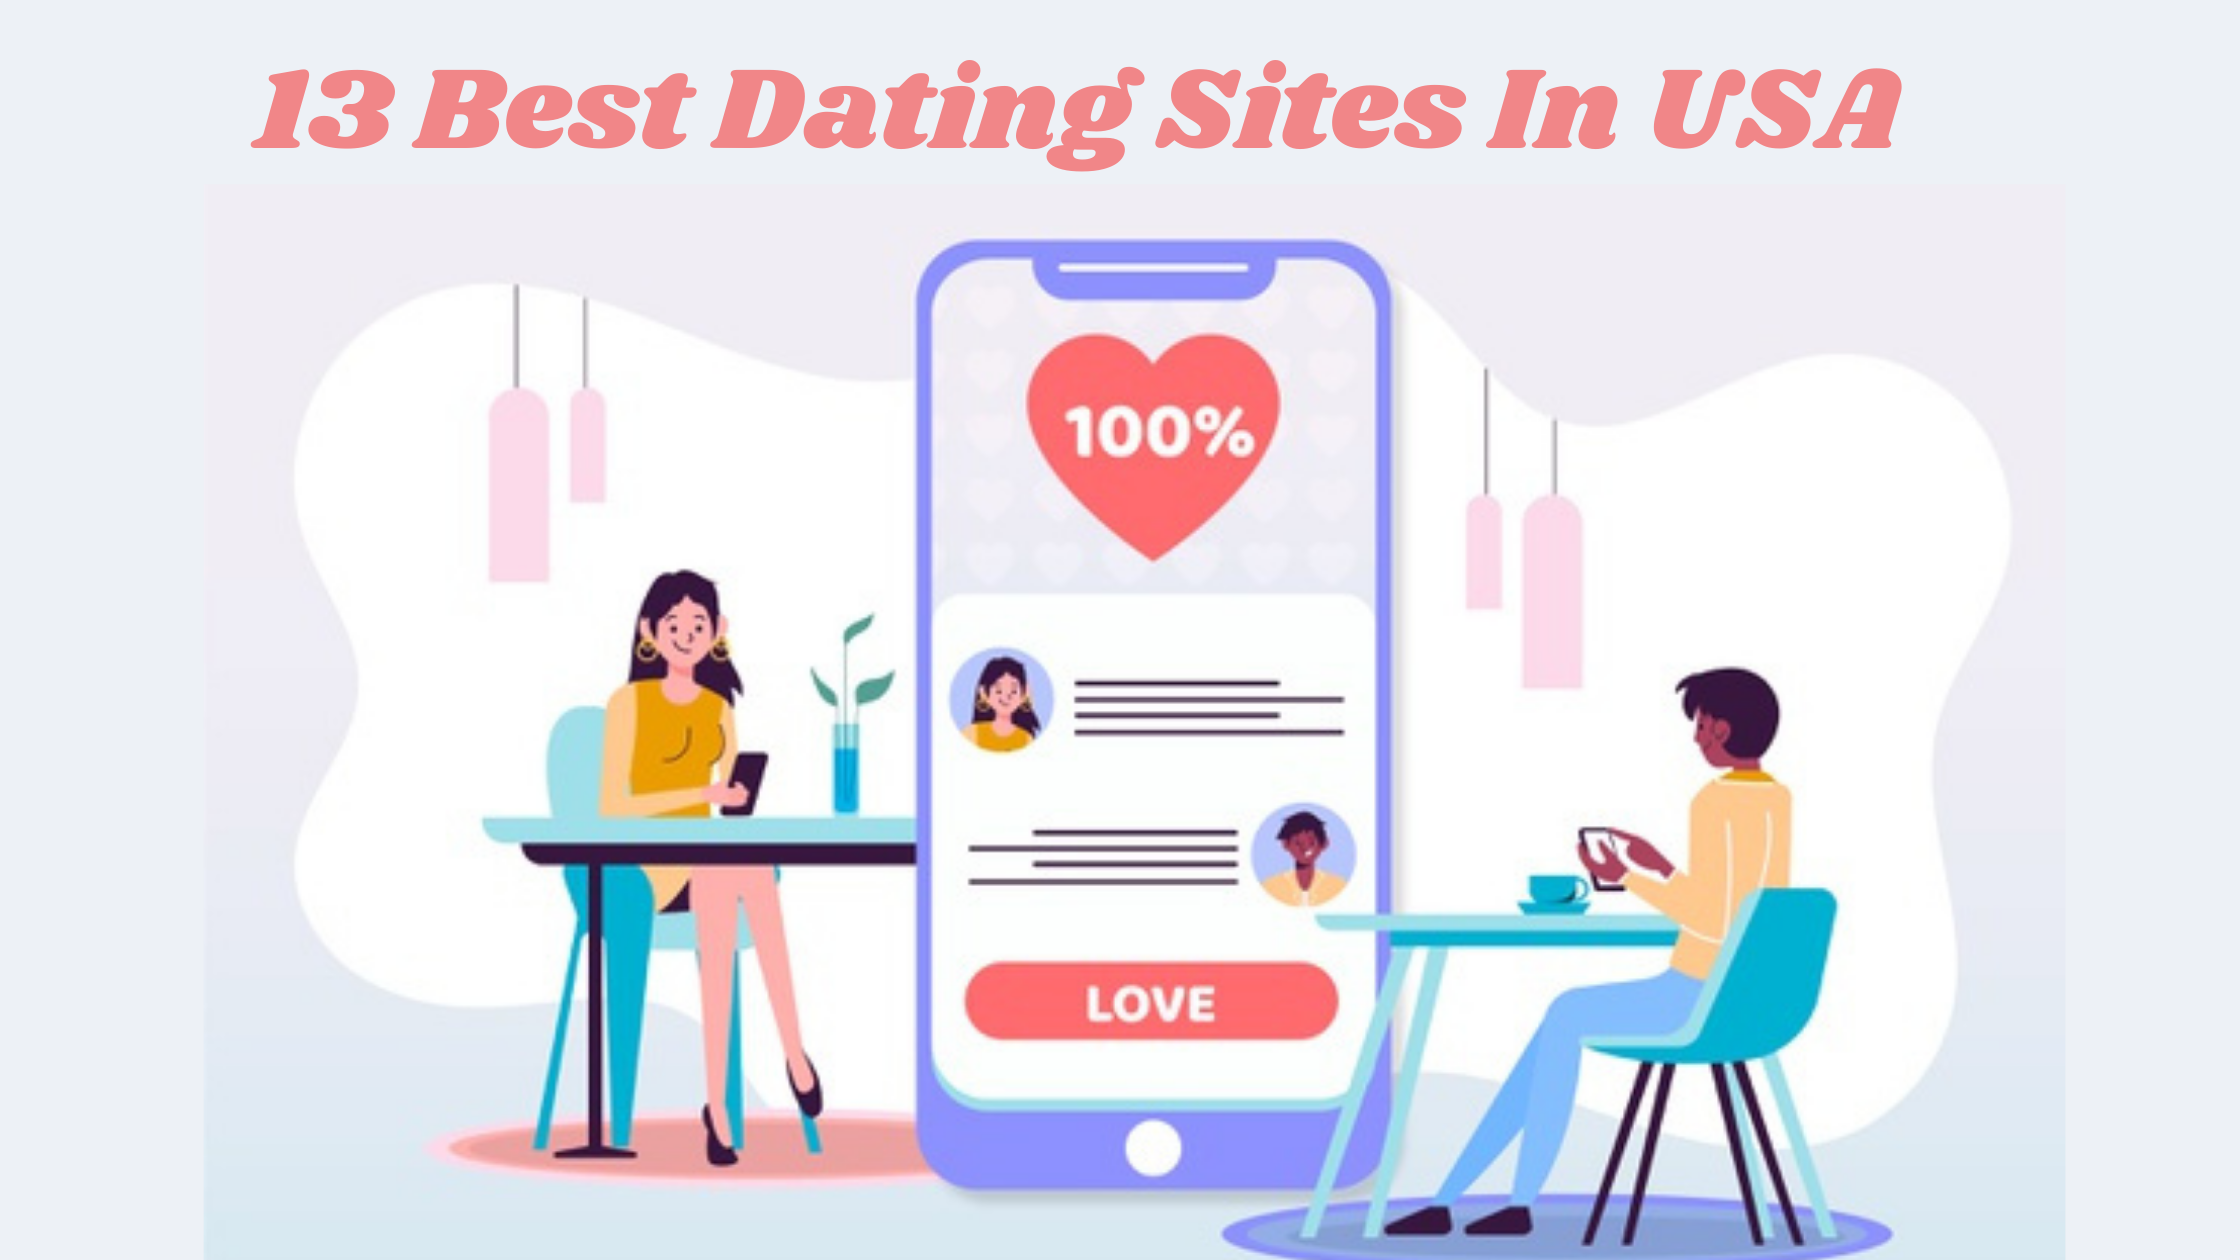 Dating blogs